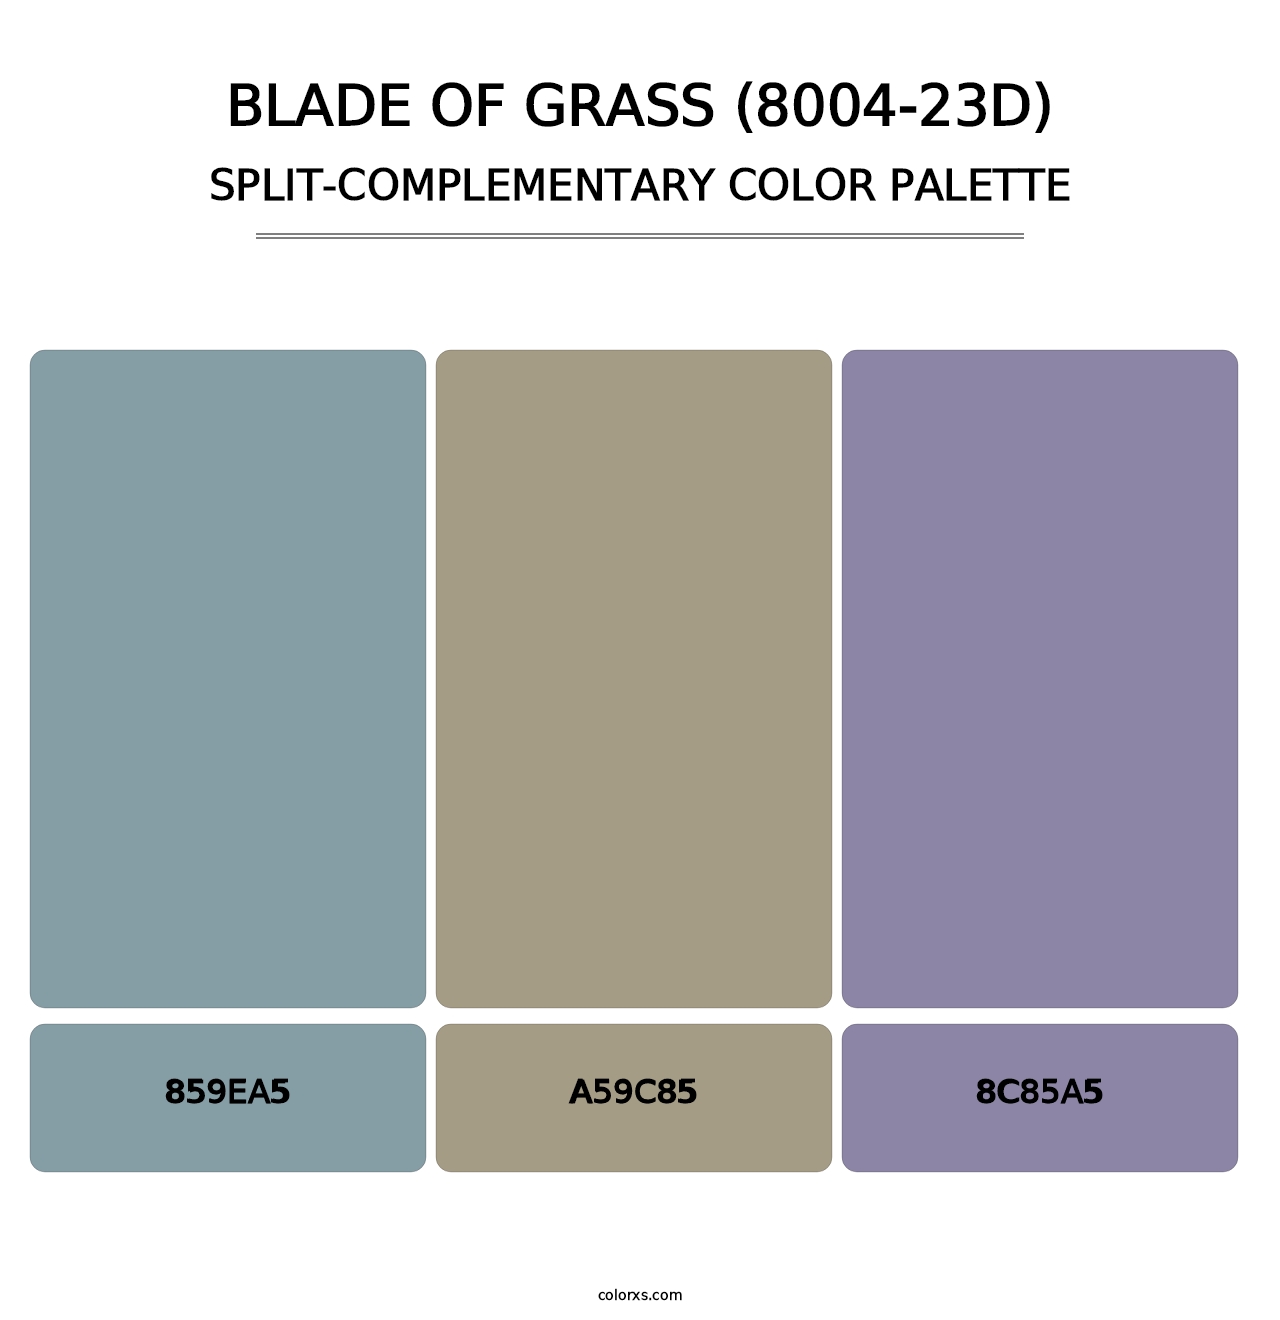 Blade of Grass (8004-23D) - Split-Complementary Color Palette